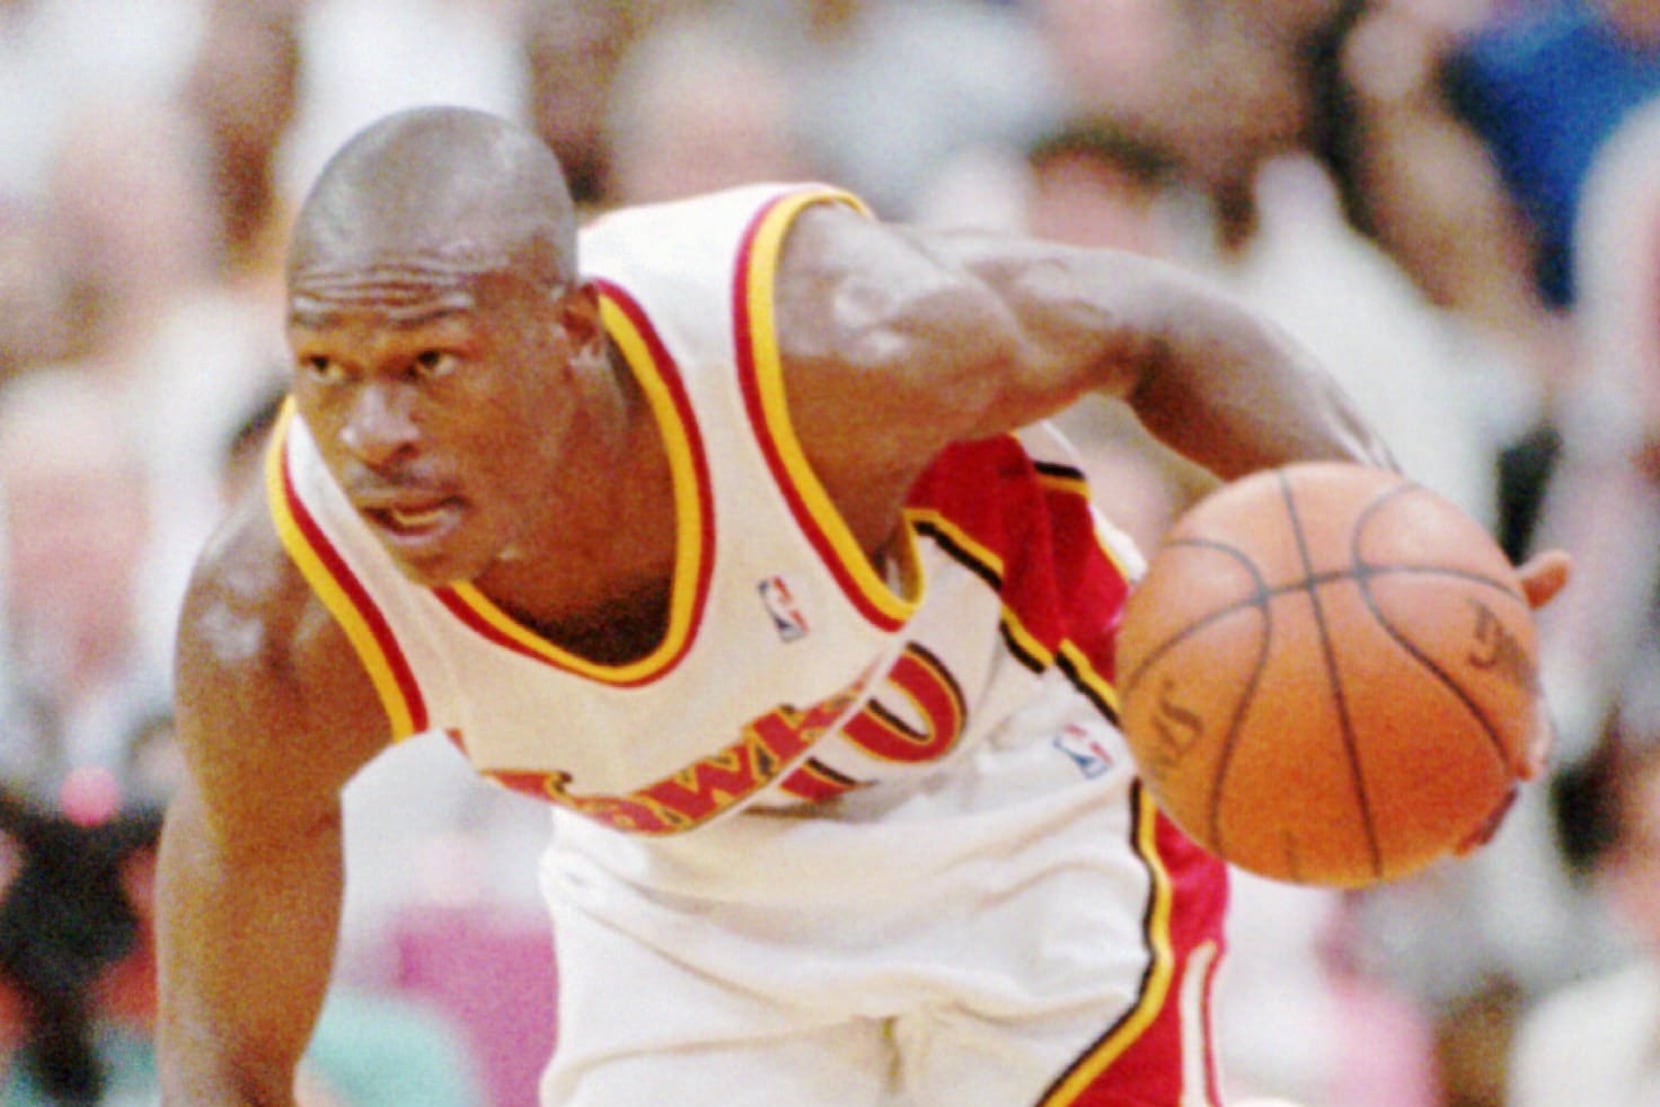 Mookie Blaylock Reportedly on Life Support Following Car Accident